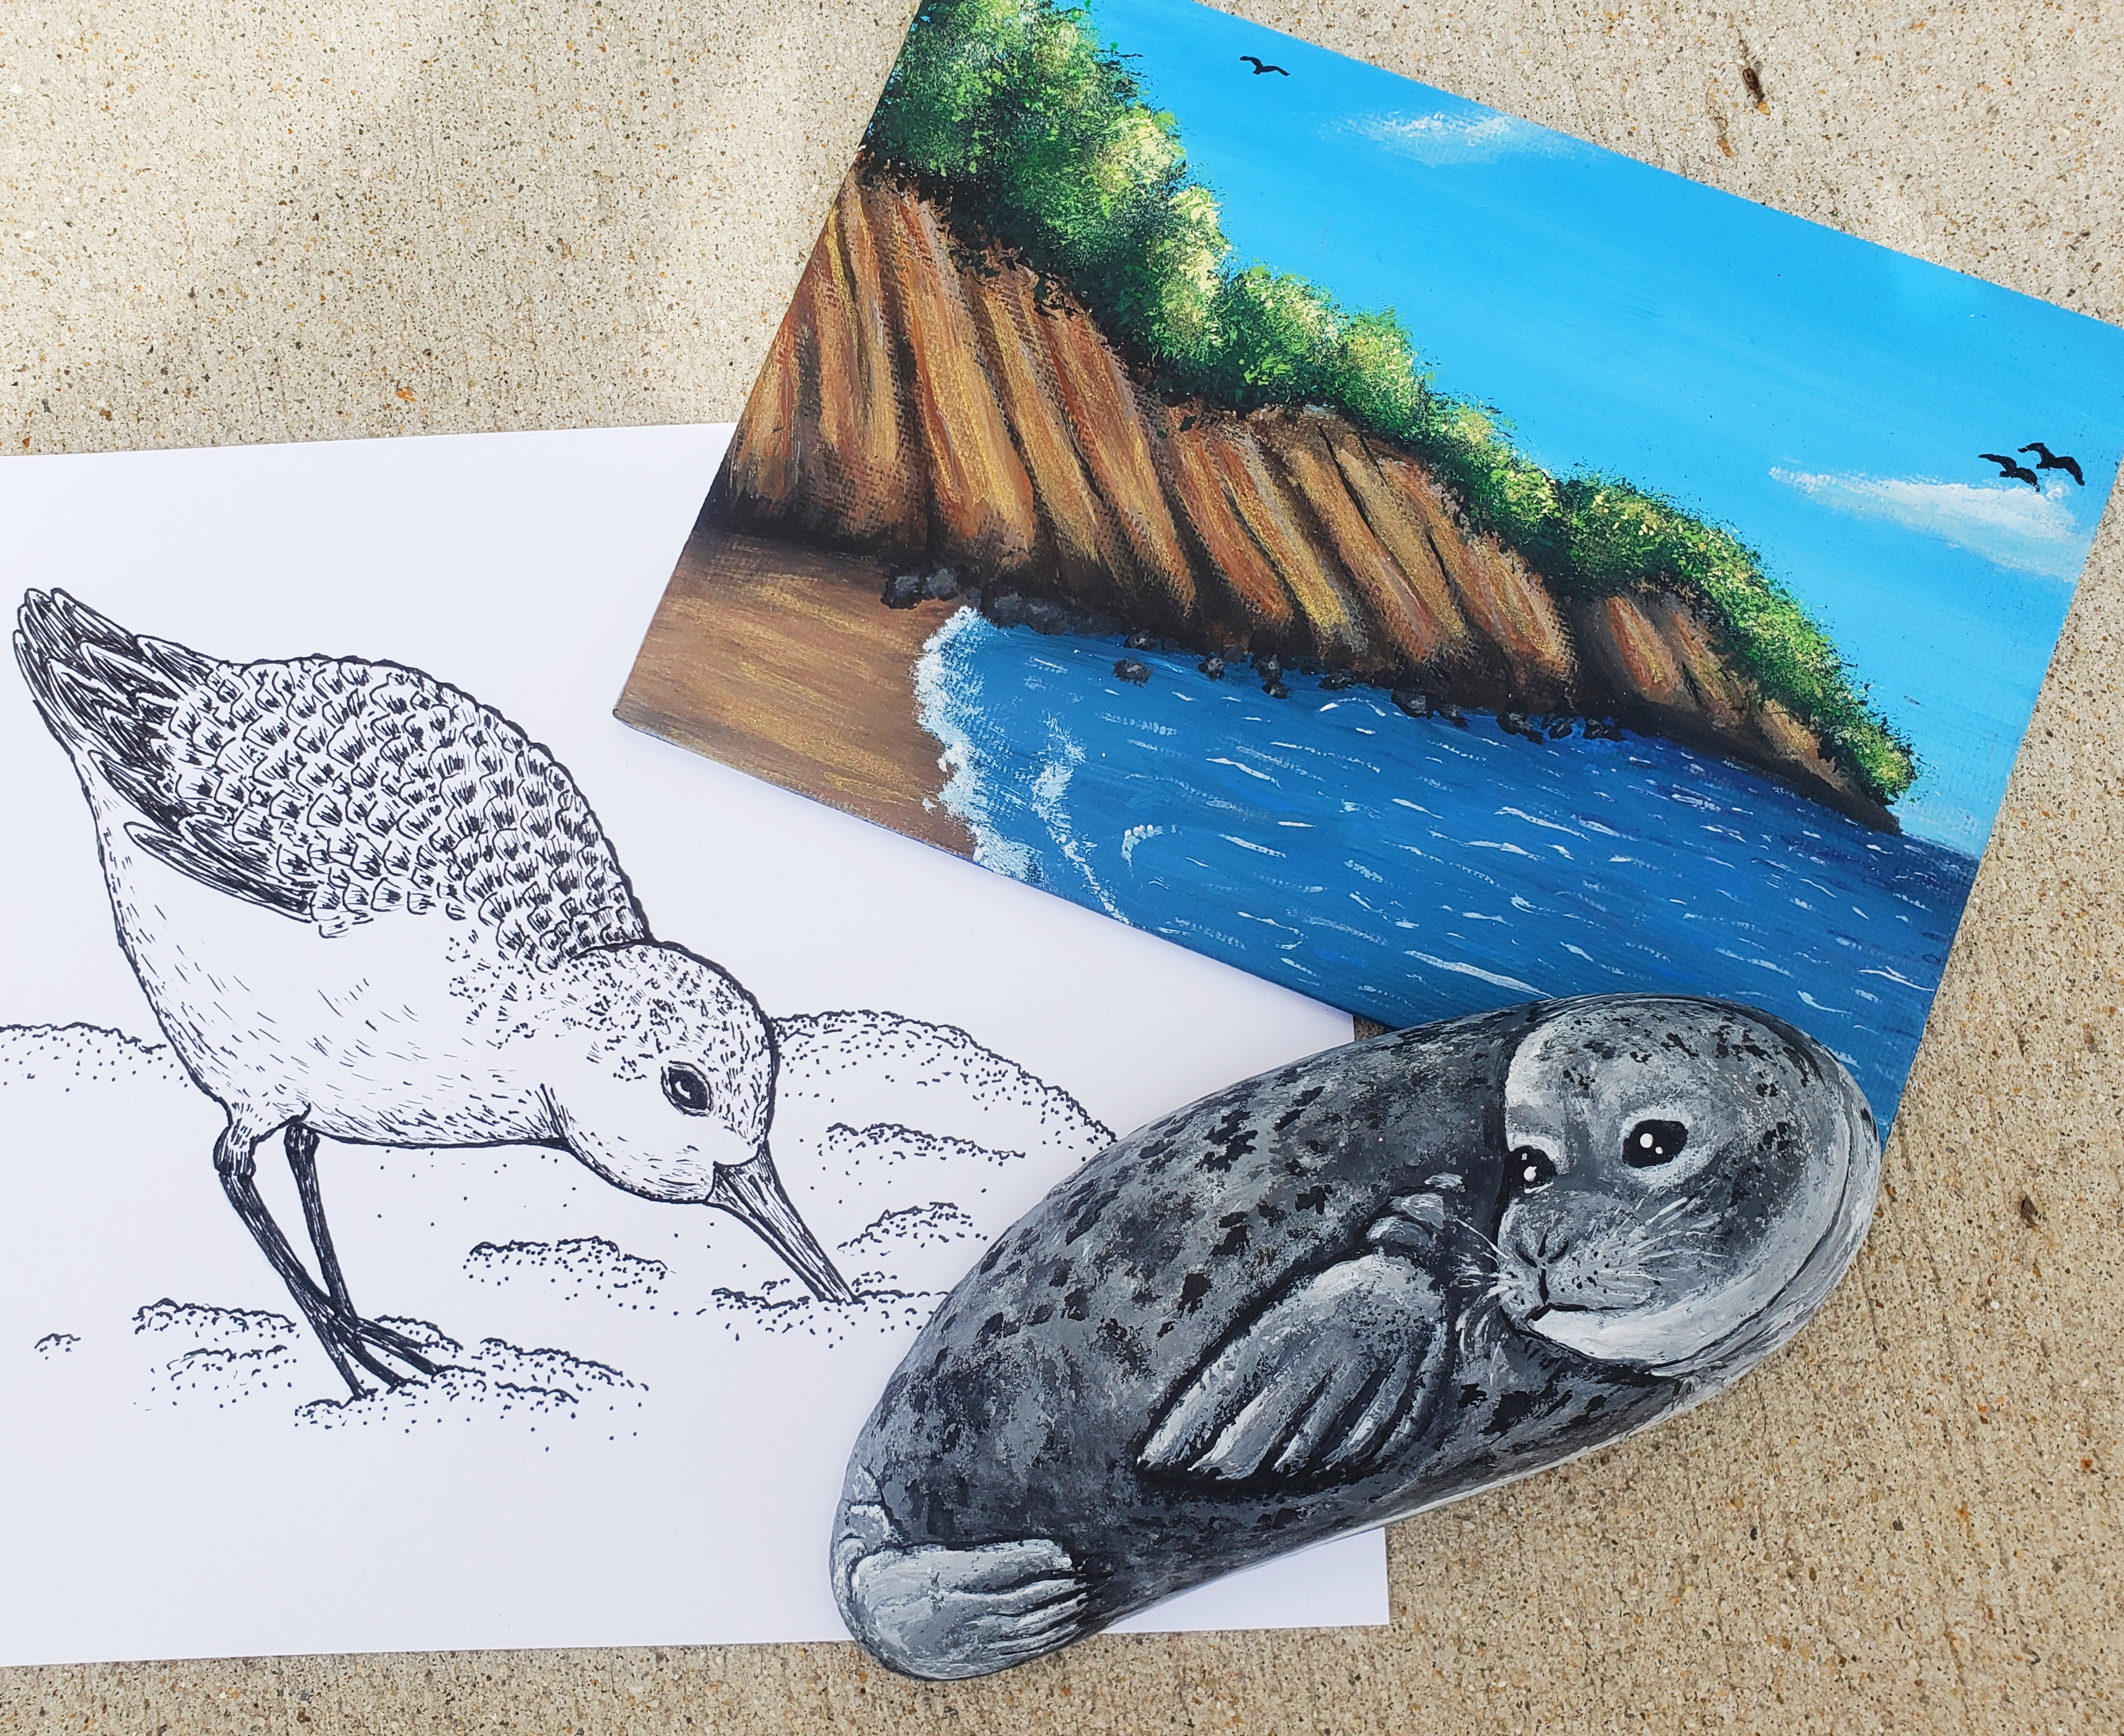 a pen sketch of  a sanderling (shore bird) a small painting of Calvert Cliffs beach and a rock painted to resemble a harbor seal